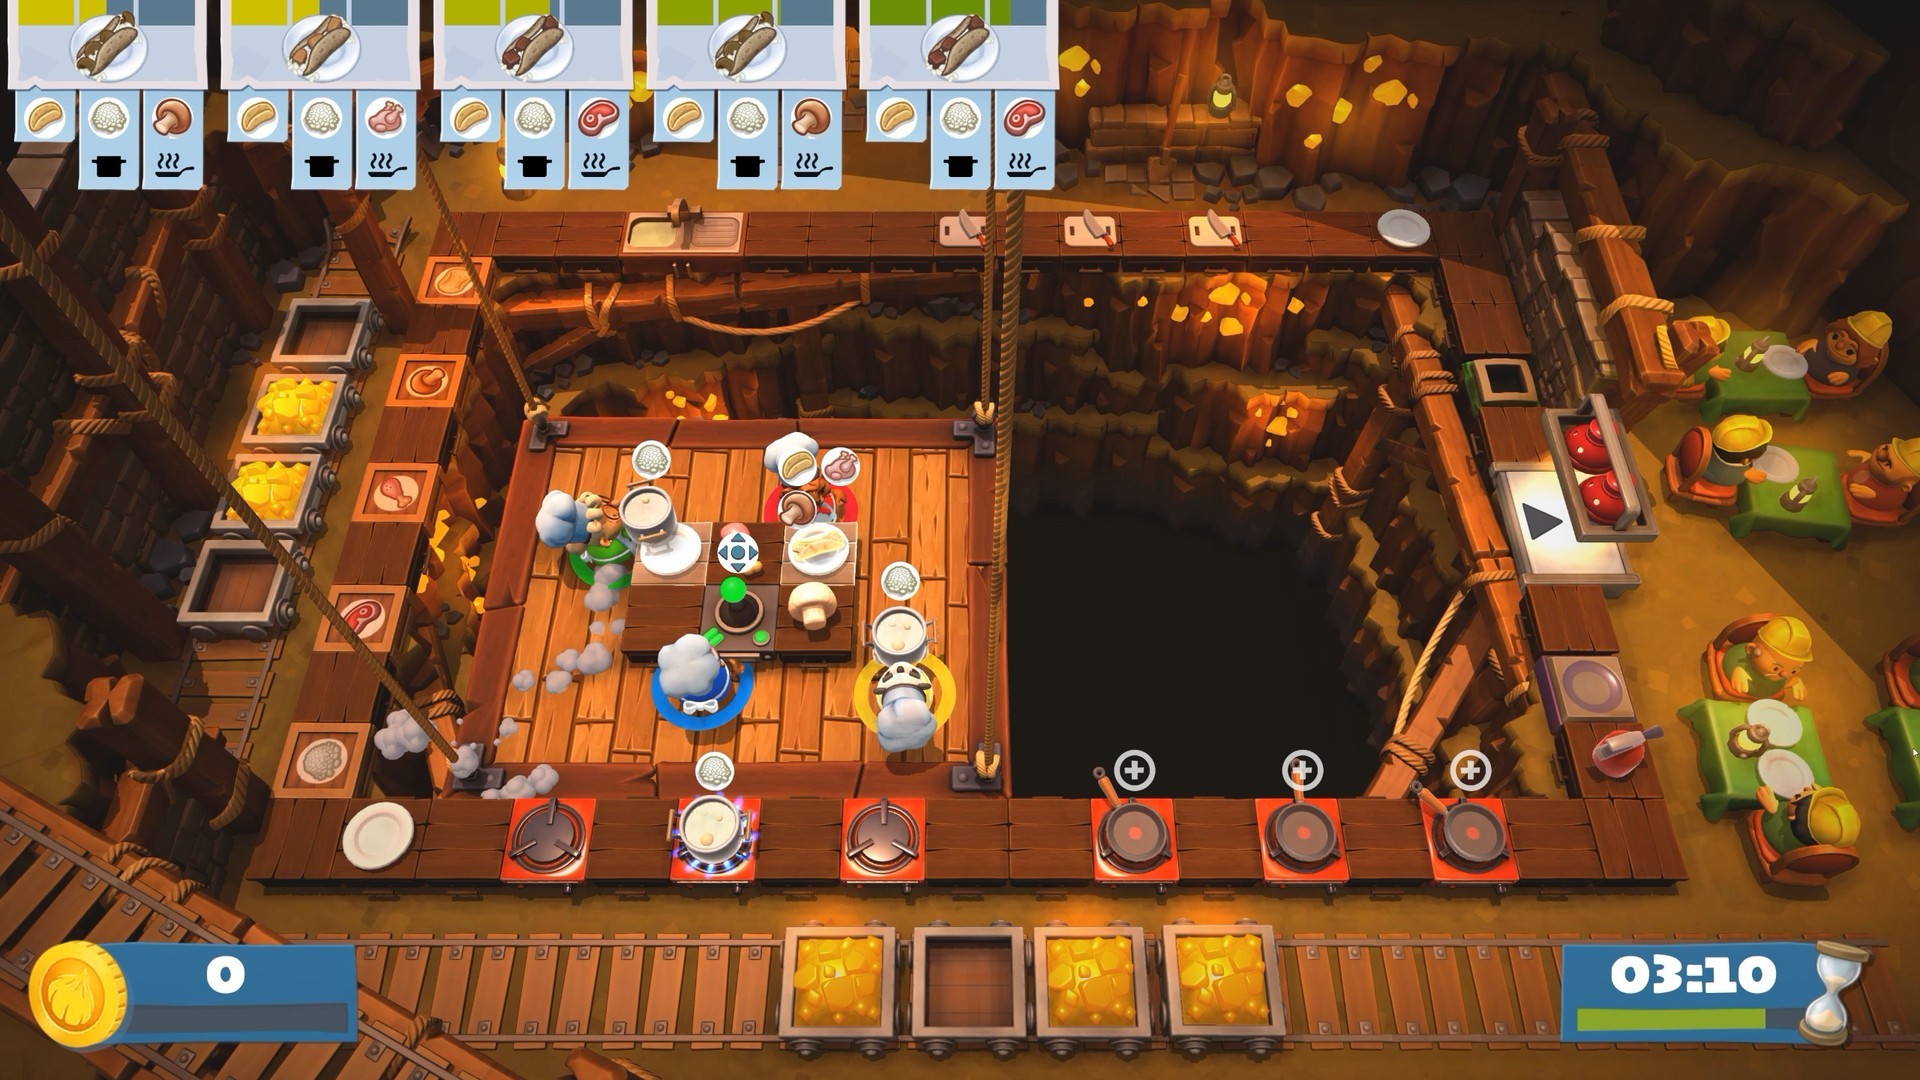 overcooked 1 switch price